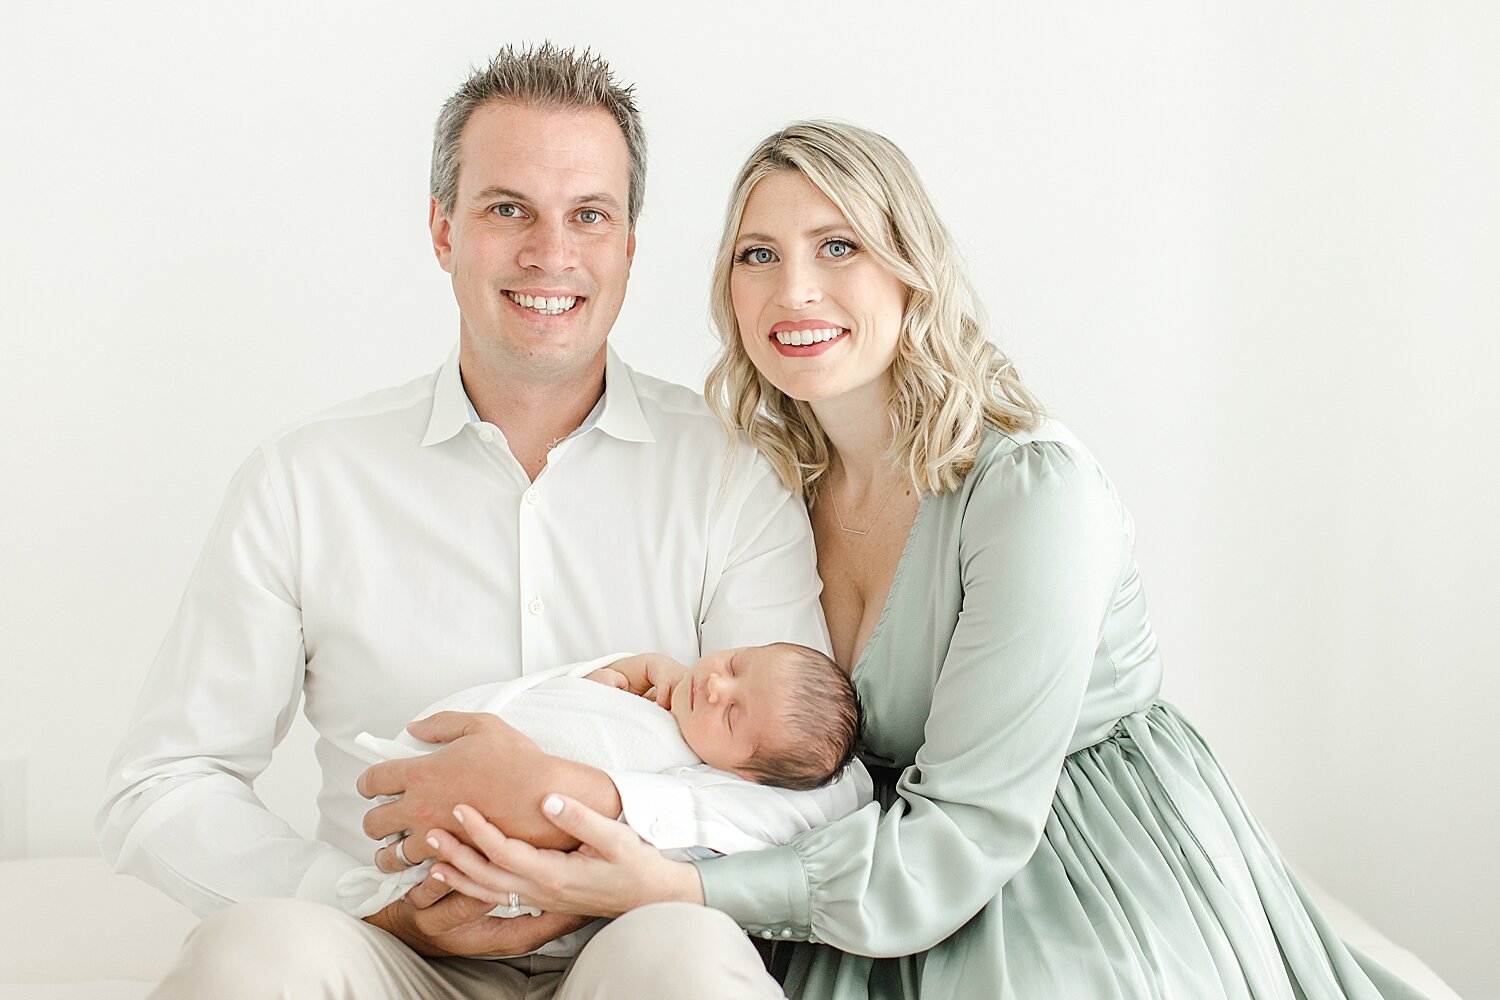 Family portrait with newborn son. Photo by Kristin Wood Photography.